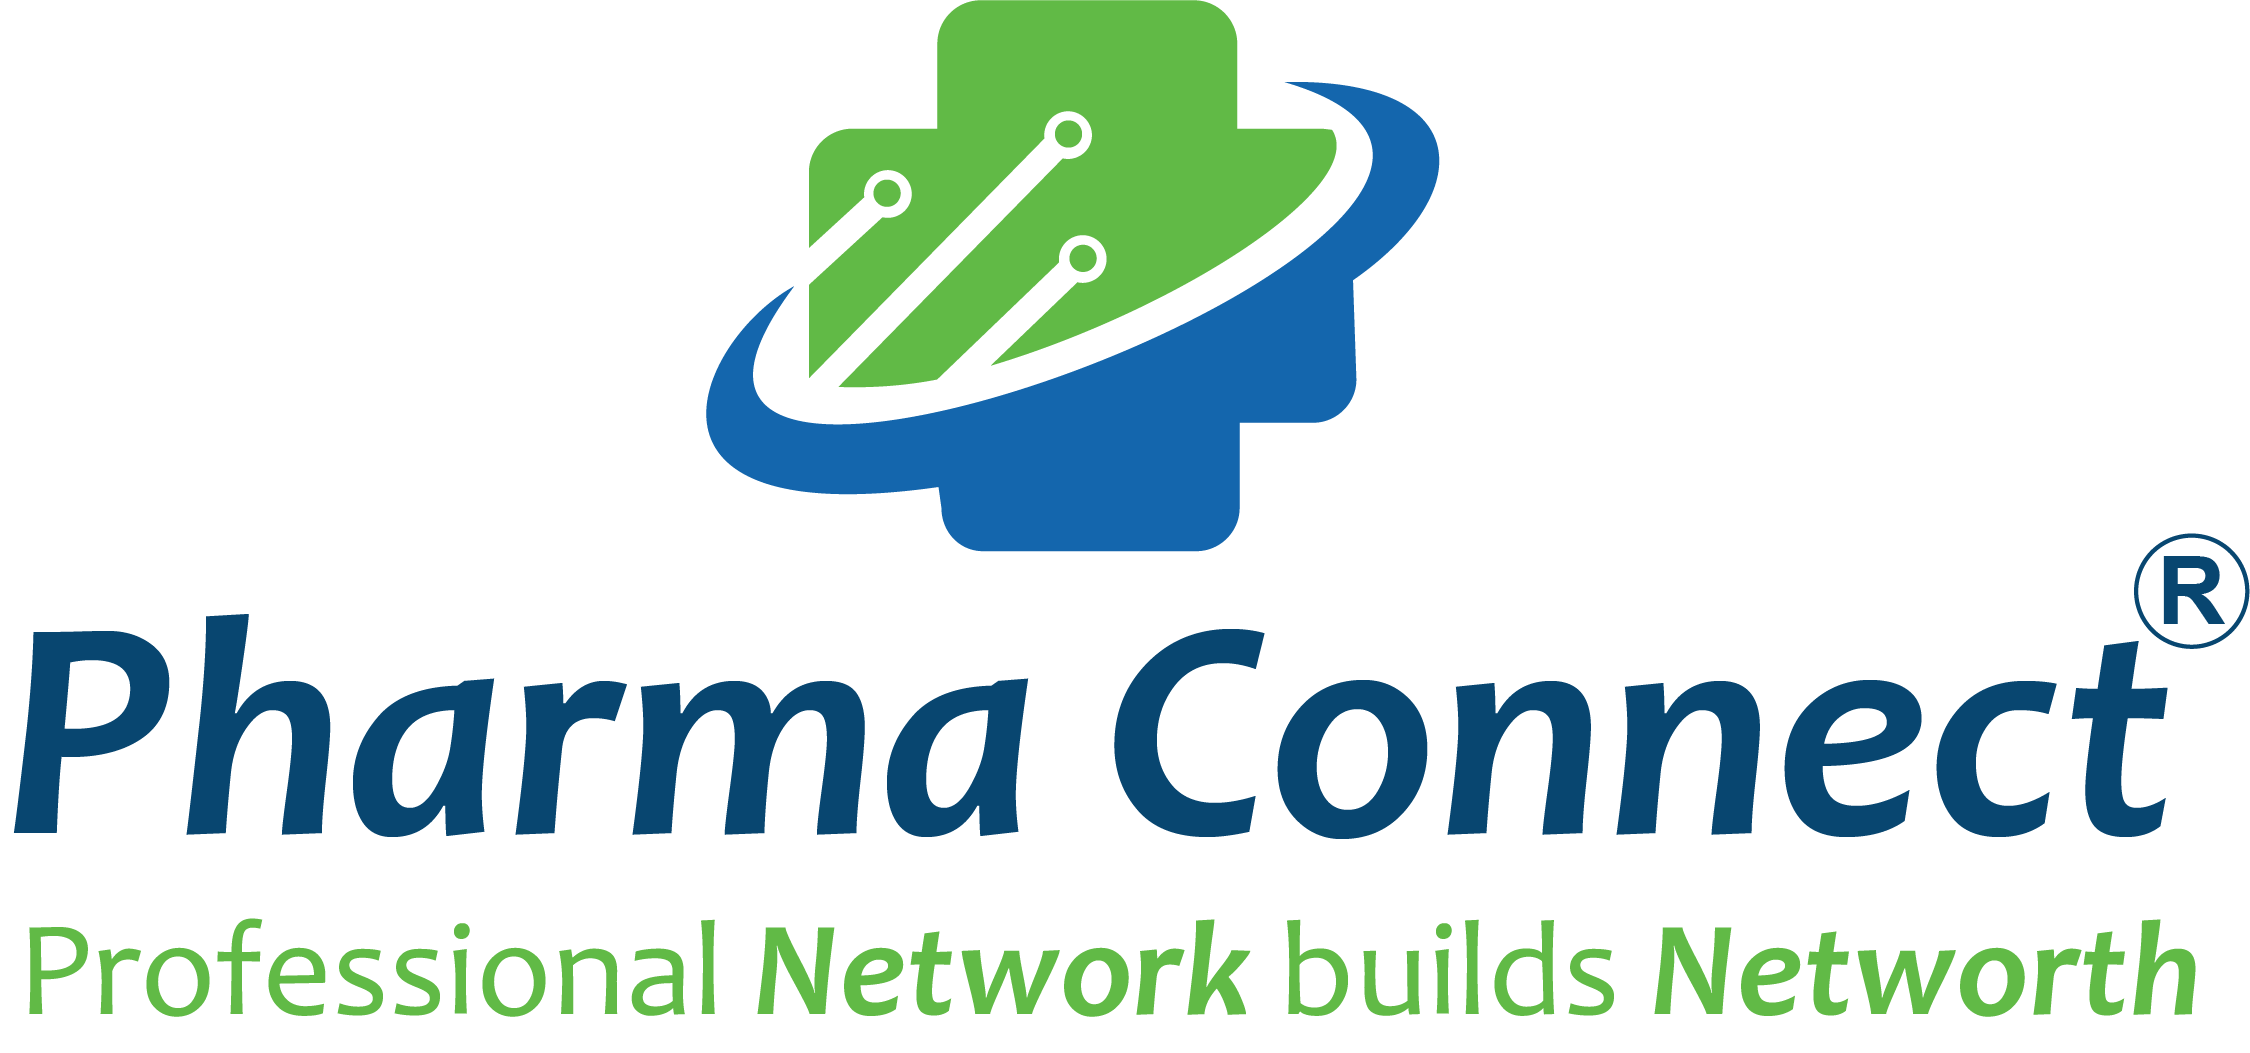 Pharma Connect :: Networking for Pharma Professionals